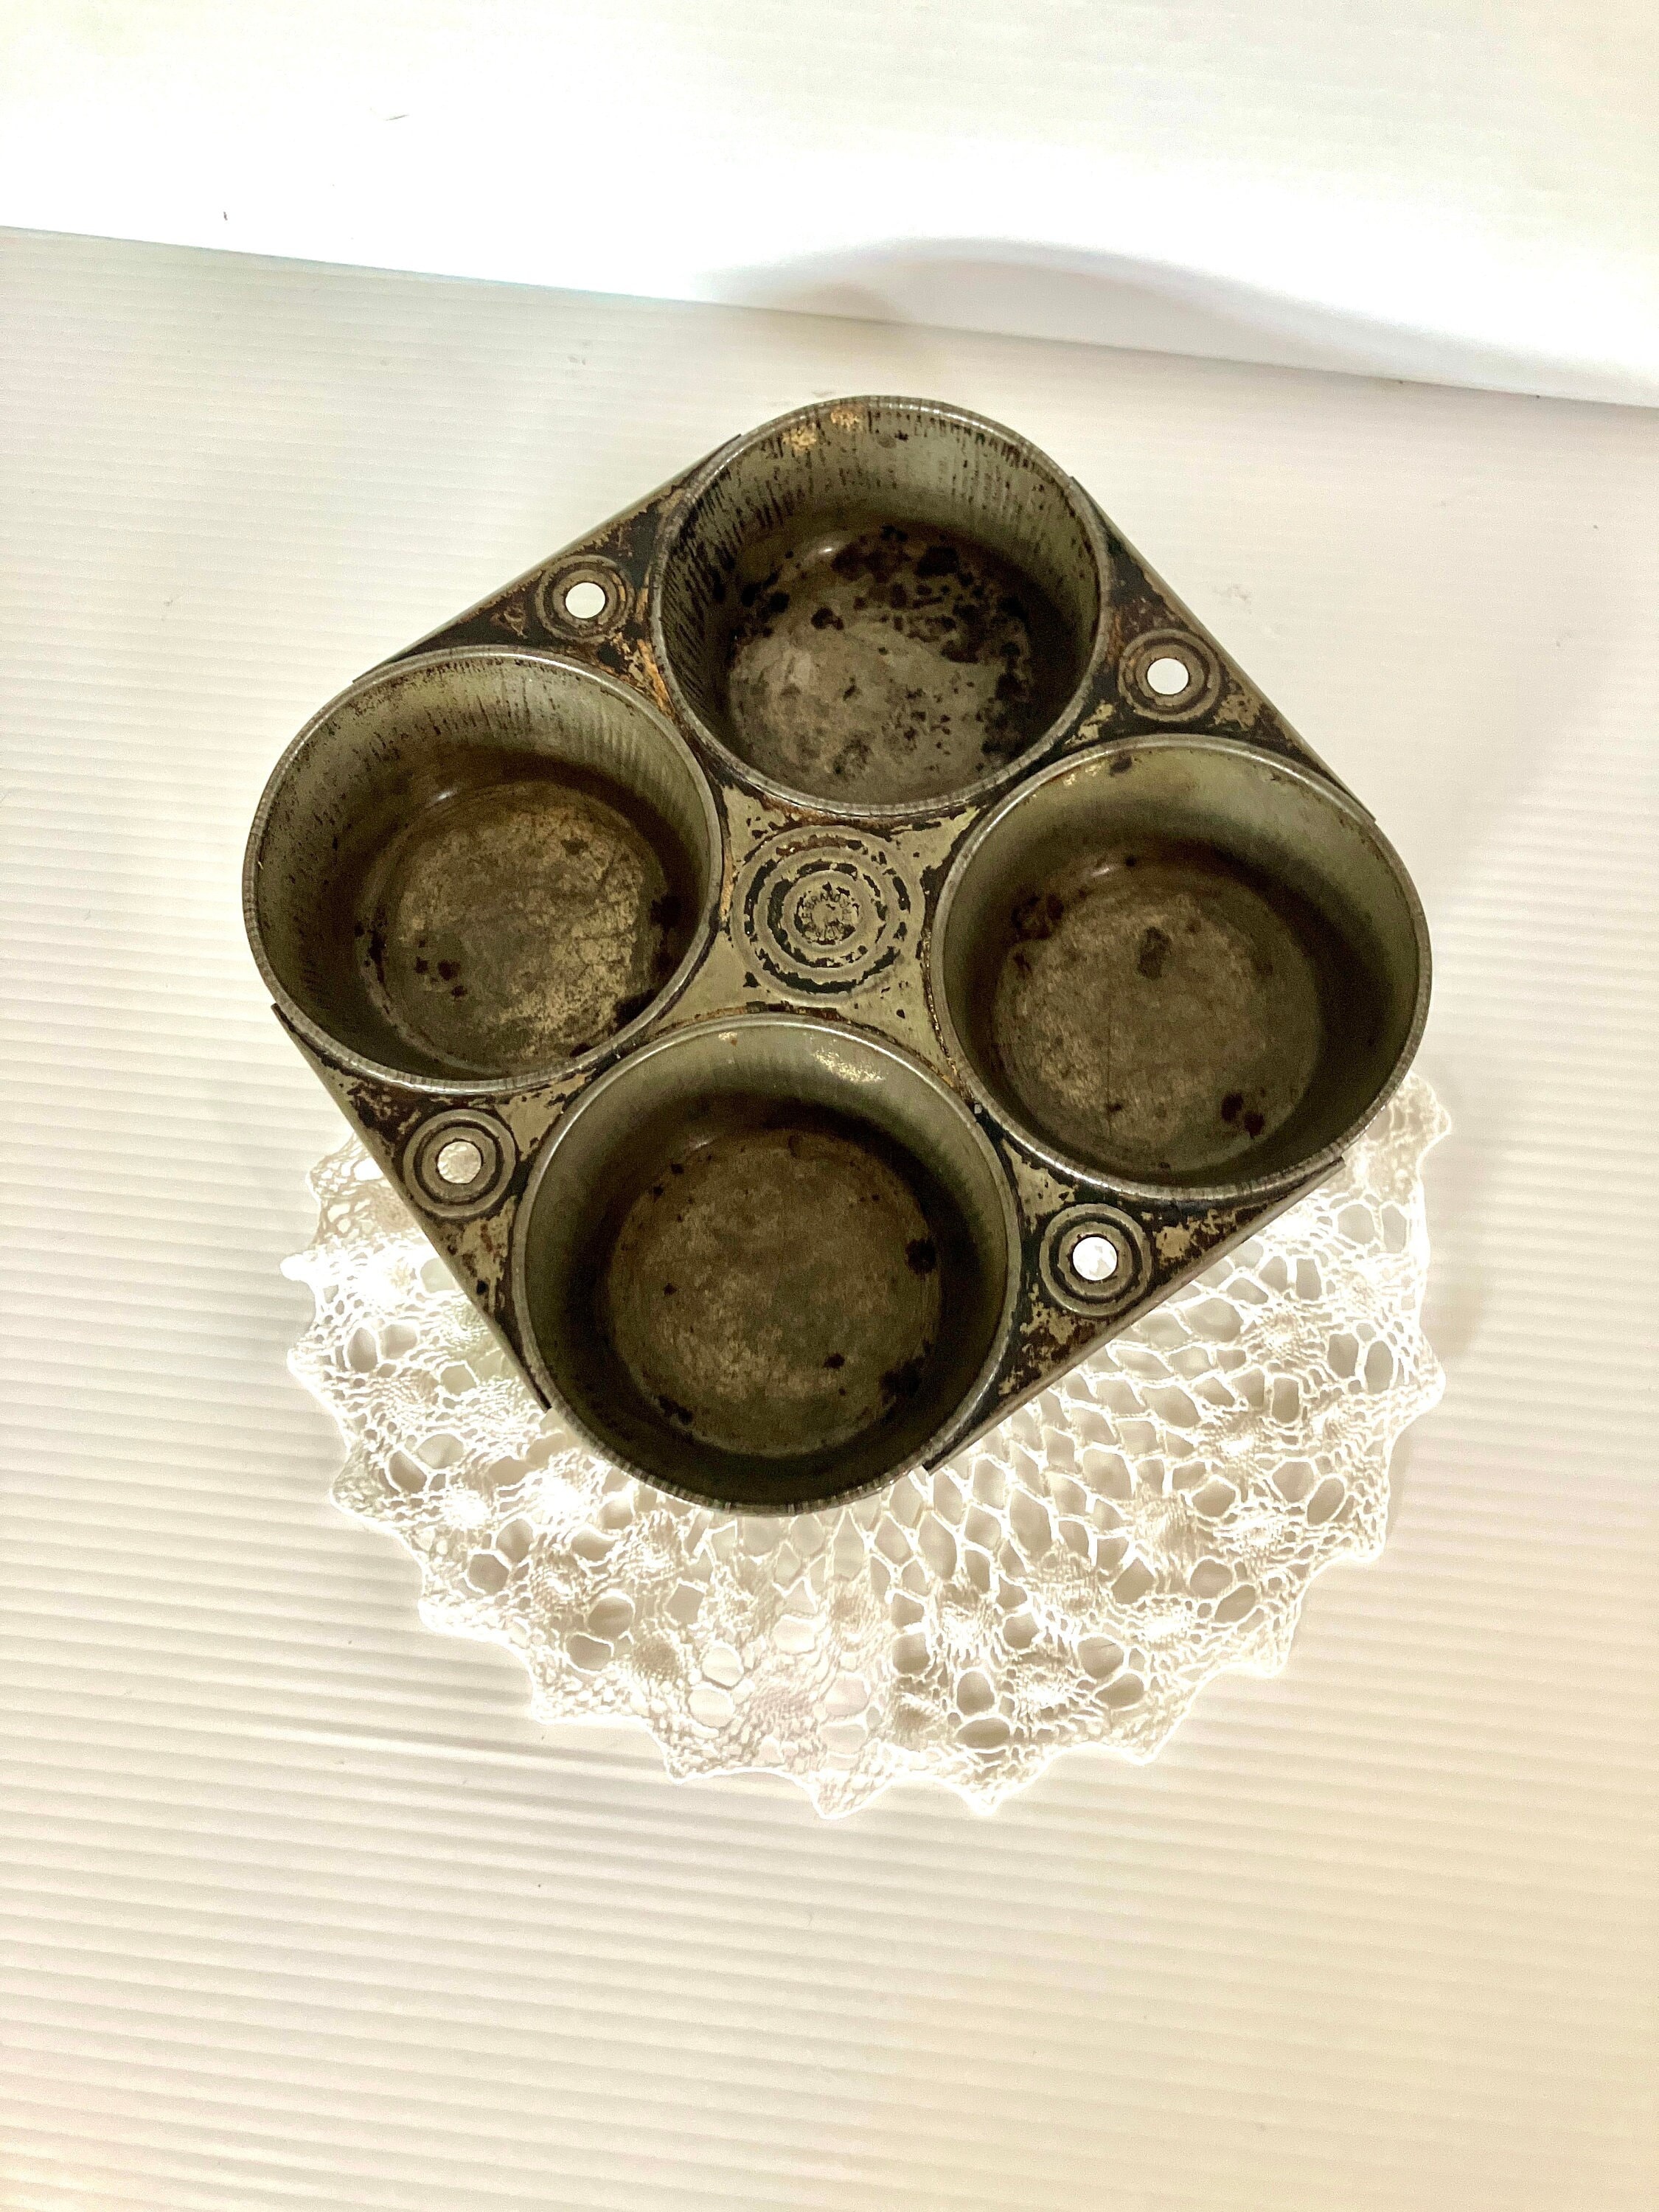 Vintage Muffin Pan 6 Cup Ekcology Silver Beauty , No T 66-6